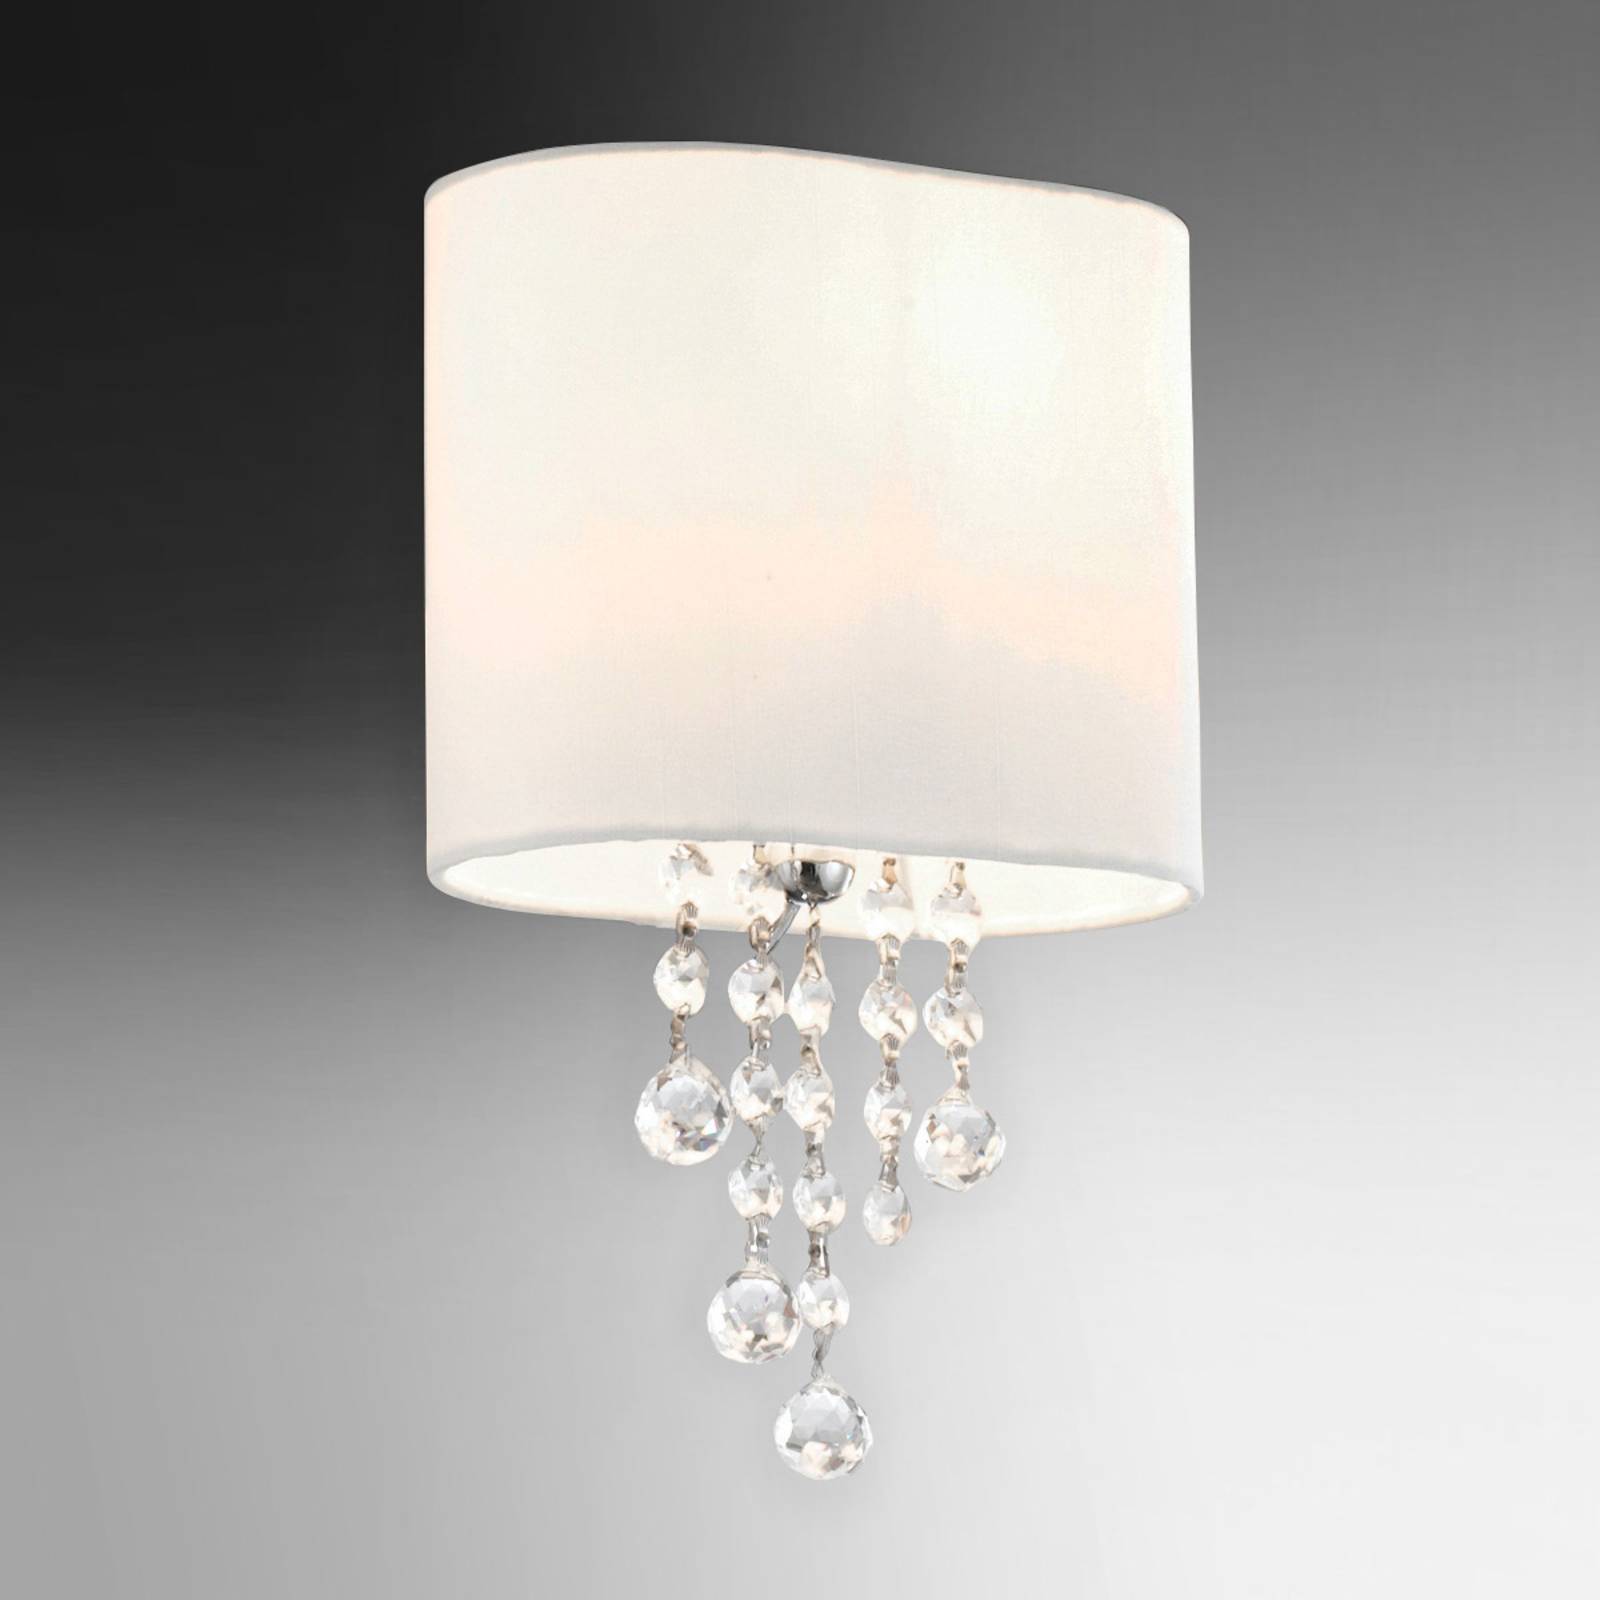 Photos - Chandelier / Lamp Searchlight Nina wall light with a fabric lampshade 